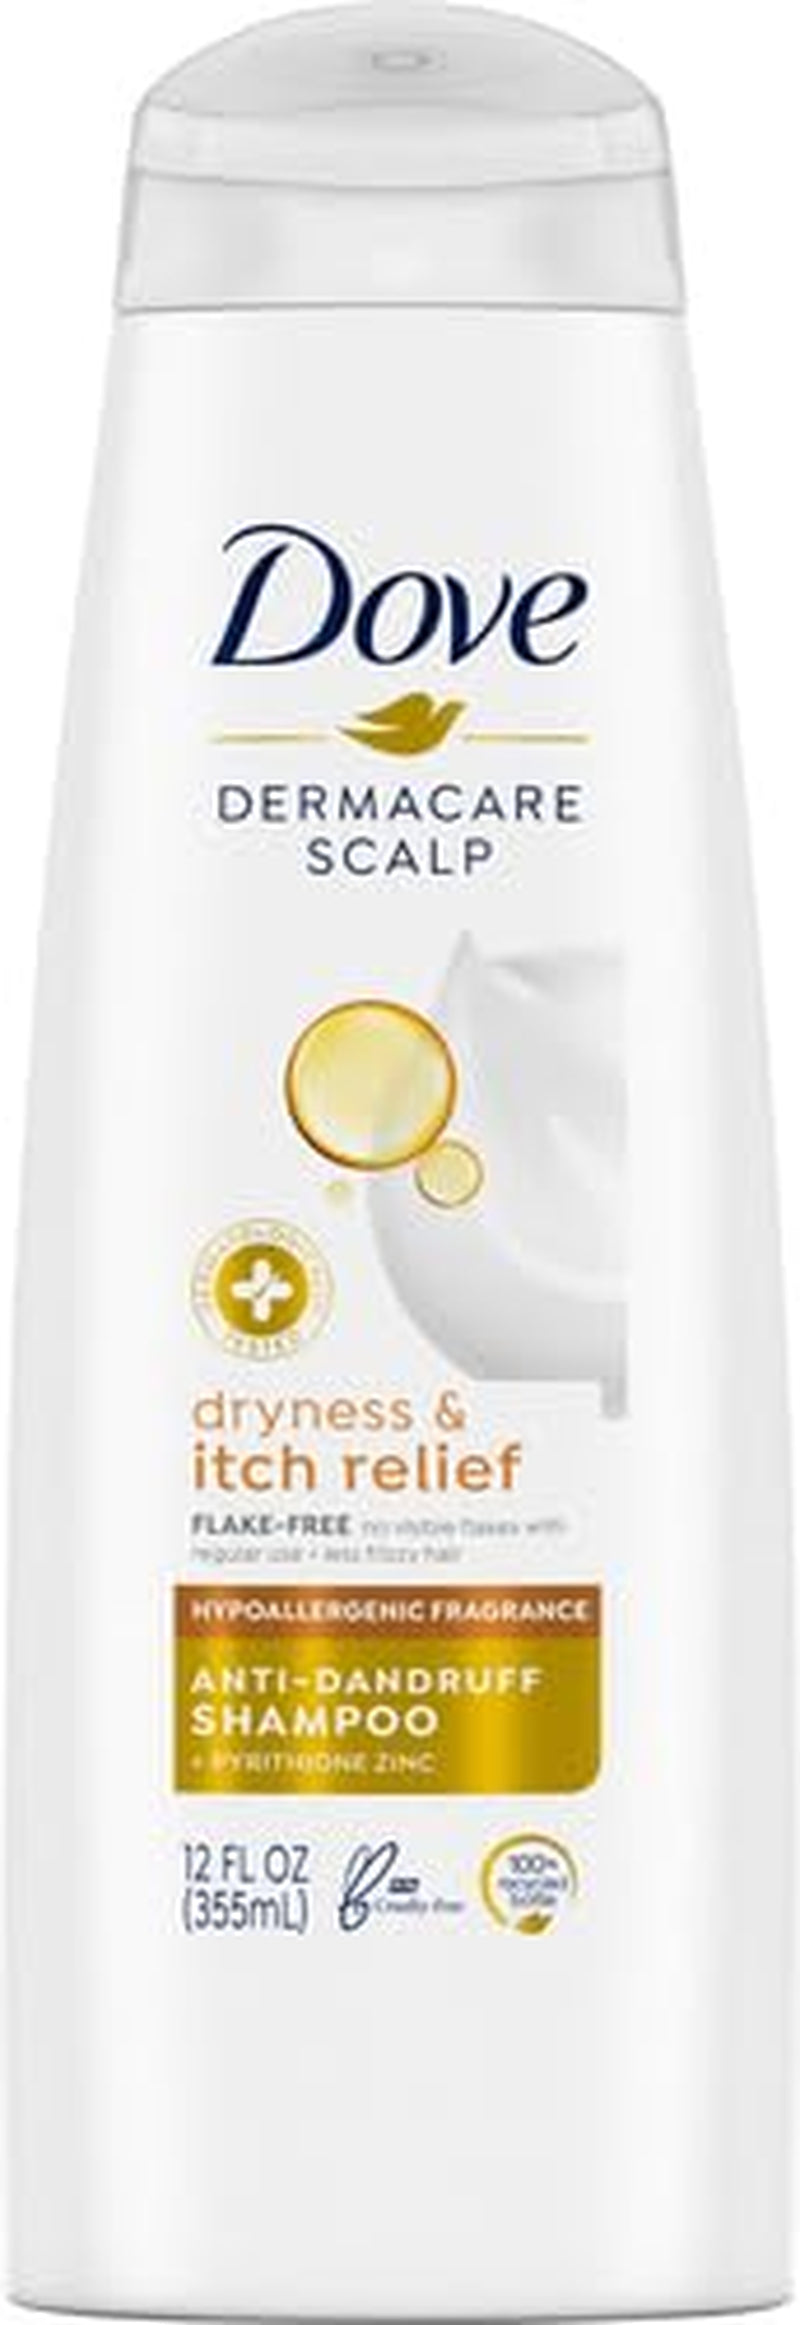 Dermacare Scalp anti Dandruff Shampoo Dryness and Itch Relief for Dry and Itchy Scalp Dry Scalp Treatment with Pyrithione Zinc 12 Fl Oz